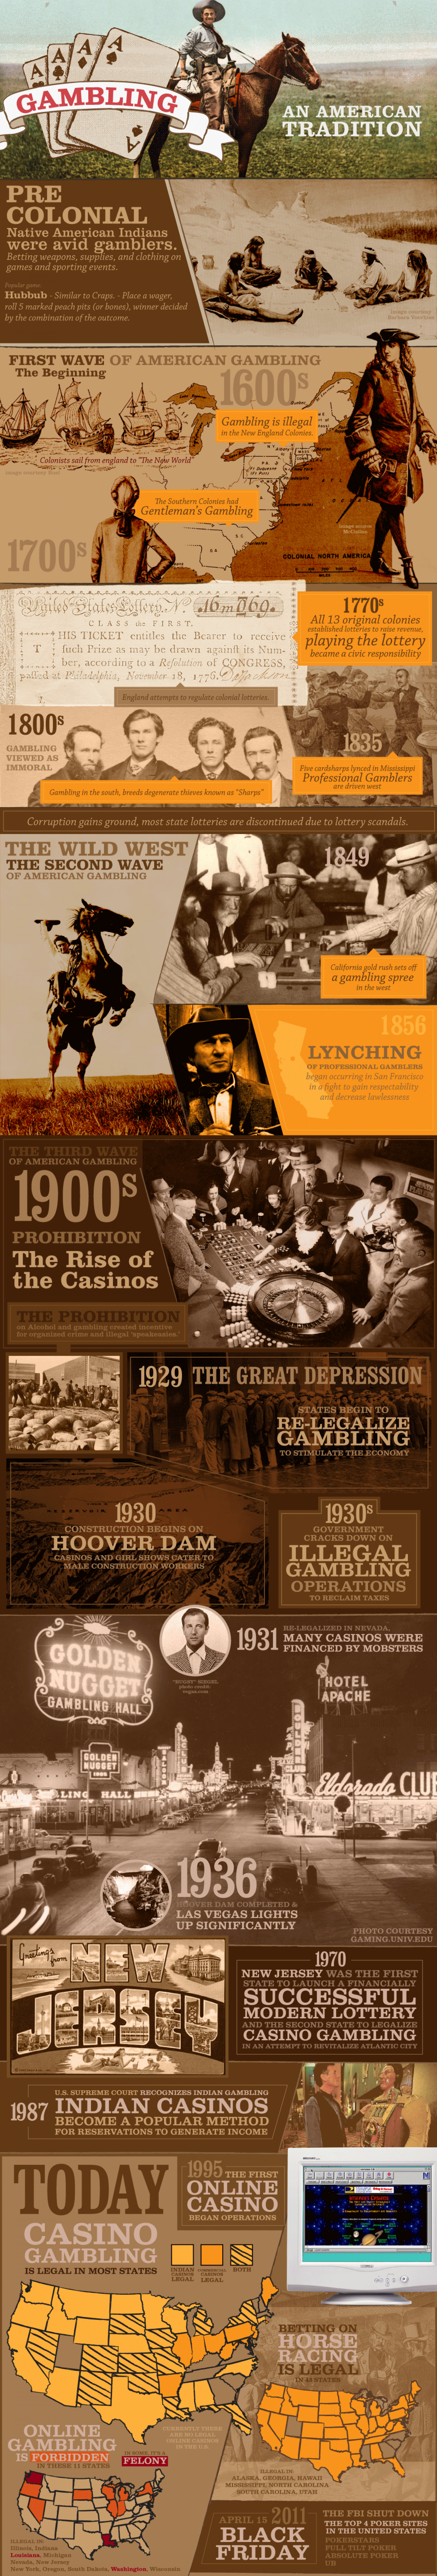 Gambling is an American Tradition - MobileCasinoParty.com Infographic